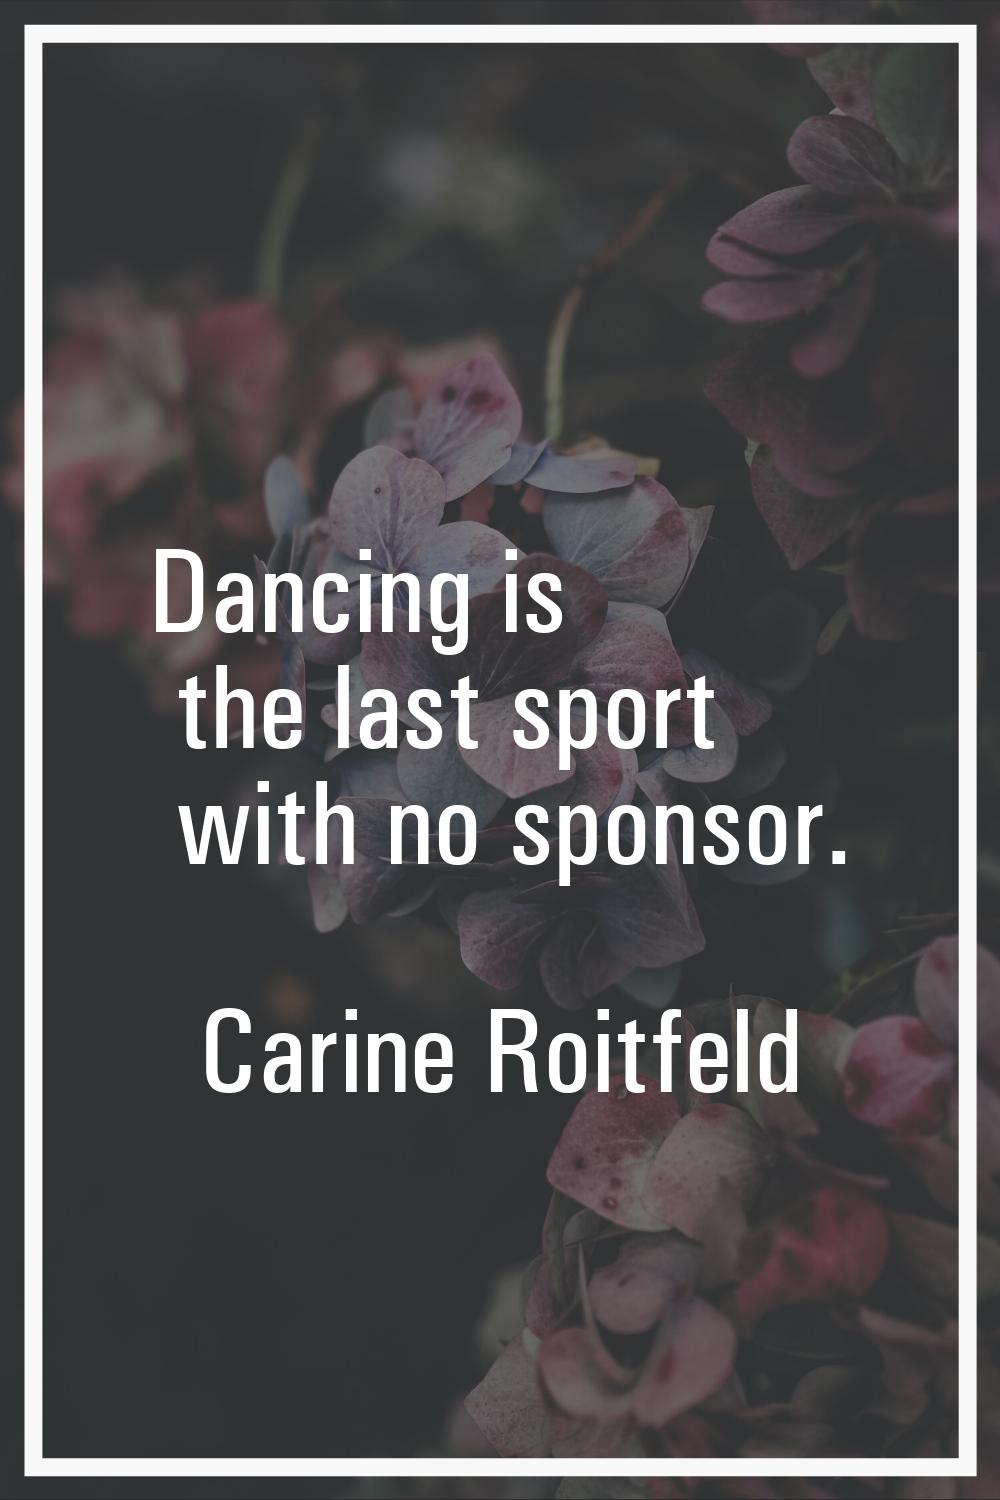 Dancing is the last sport with no sponsor.